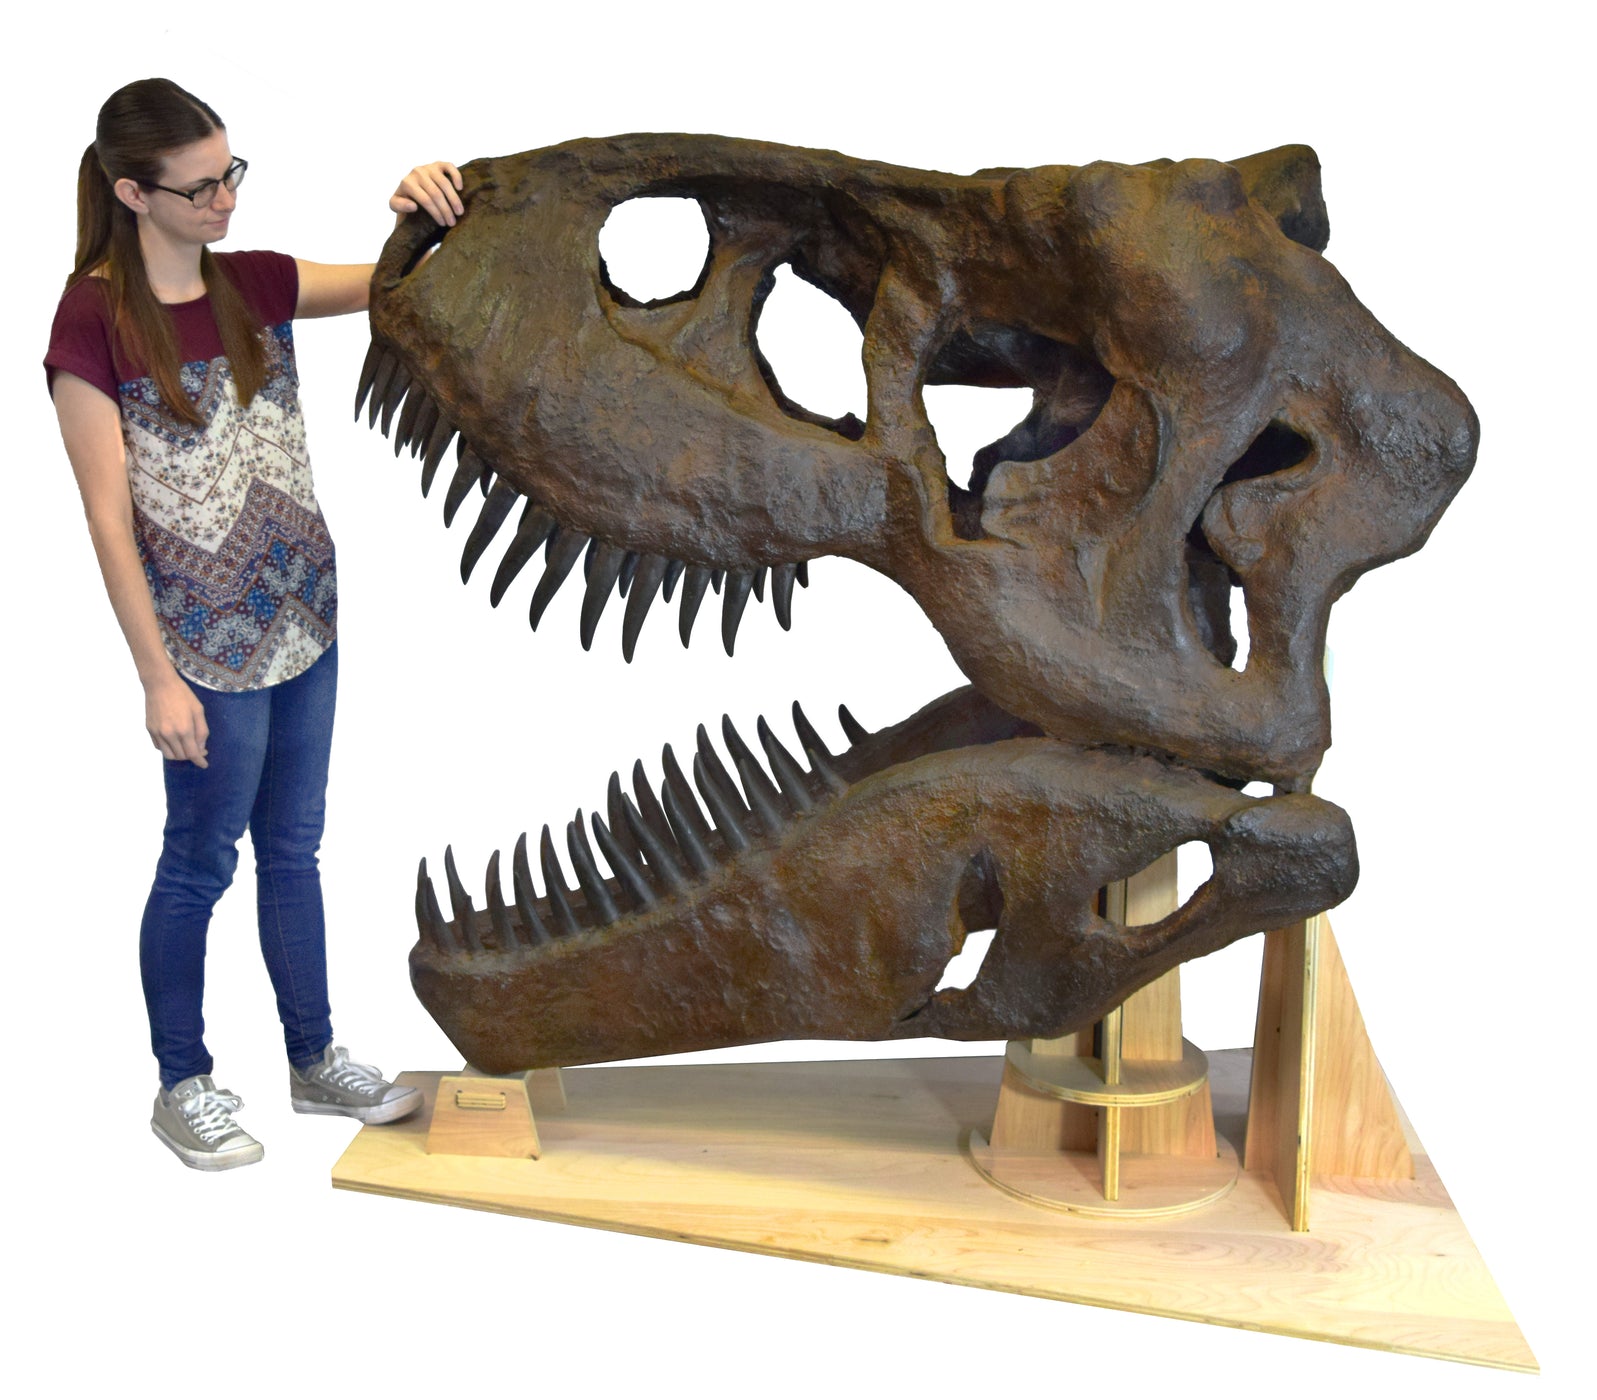 Albums 92+ Images life size t-rex skull replica Completed